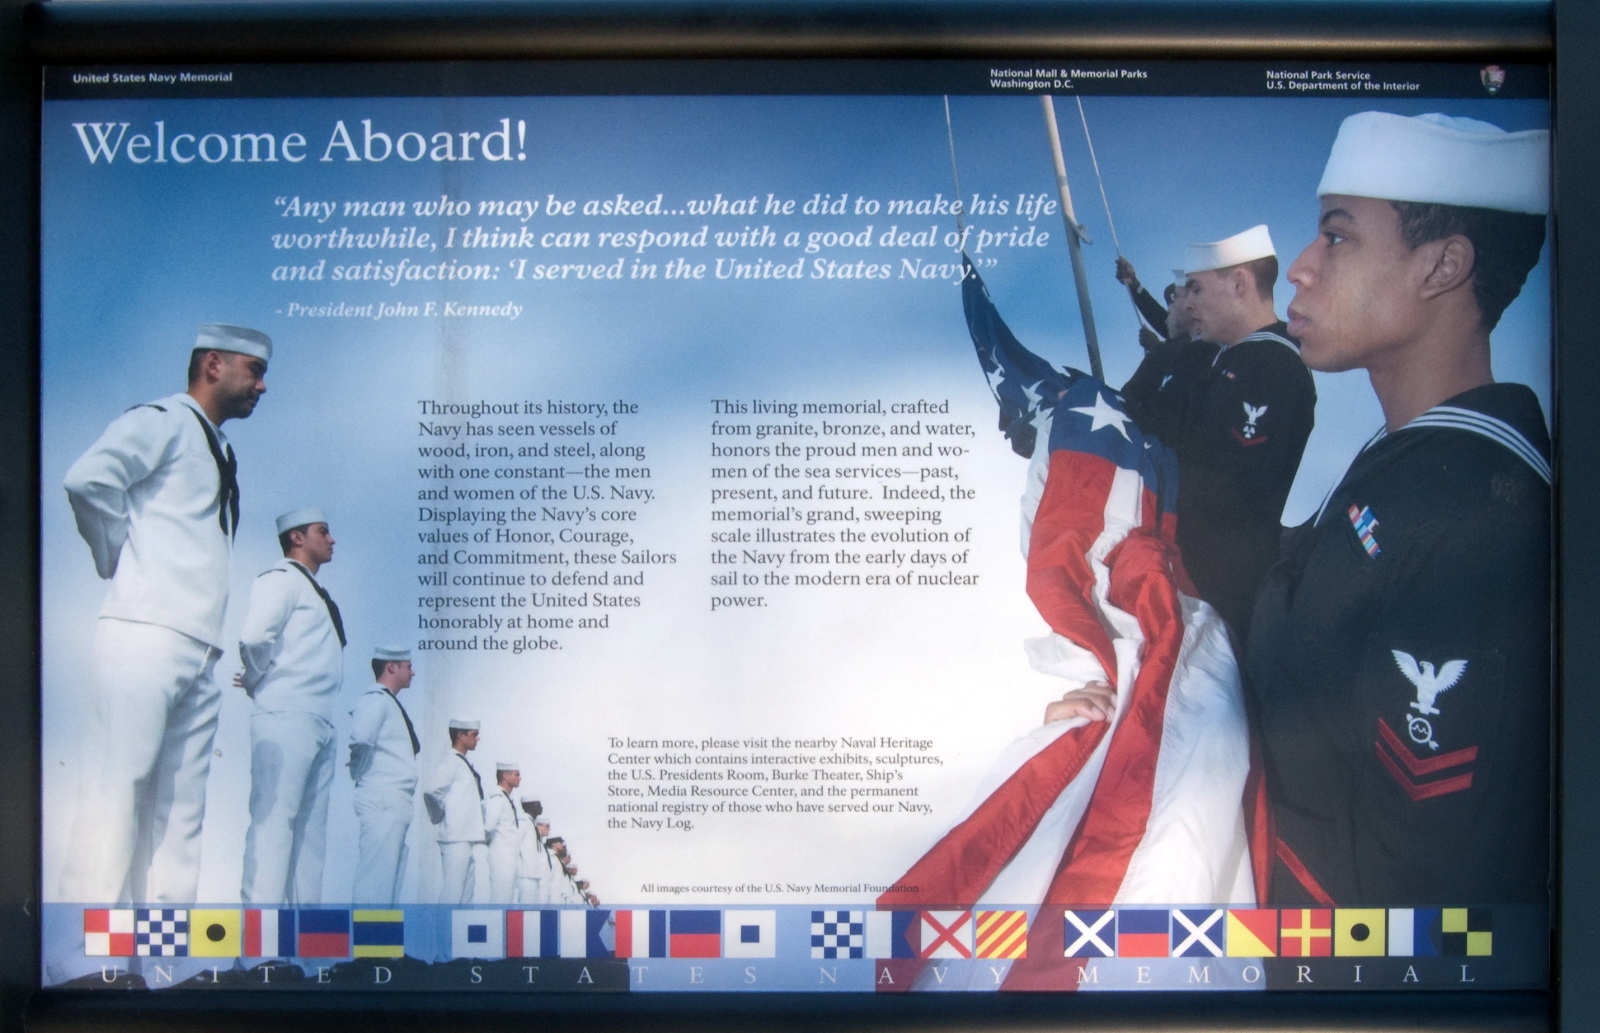 United States Navy Memorial: Welcome Aboard!